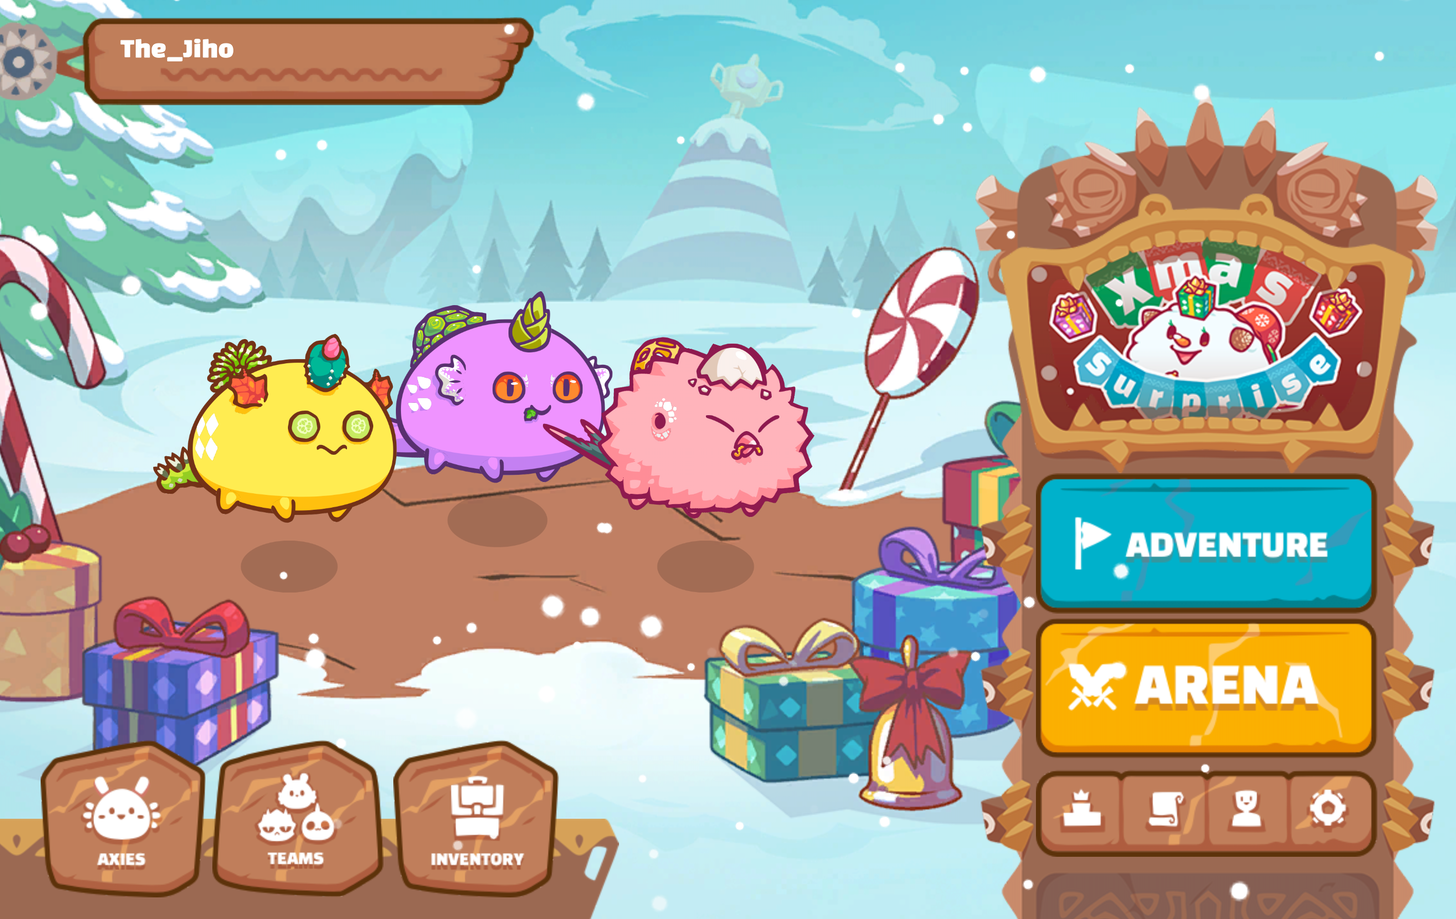 Photo for the Article - Play to Earn: Make Money Playing Axie Infinity